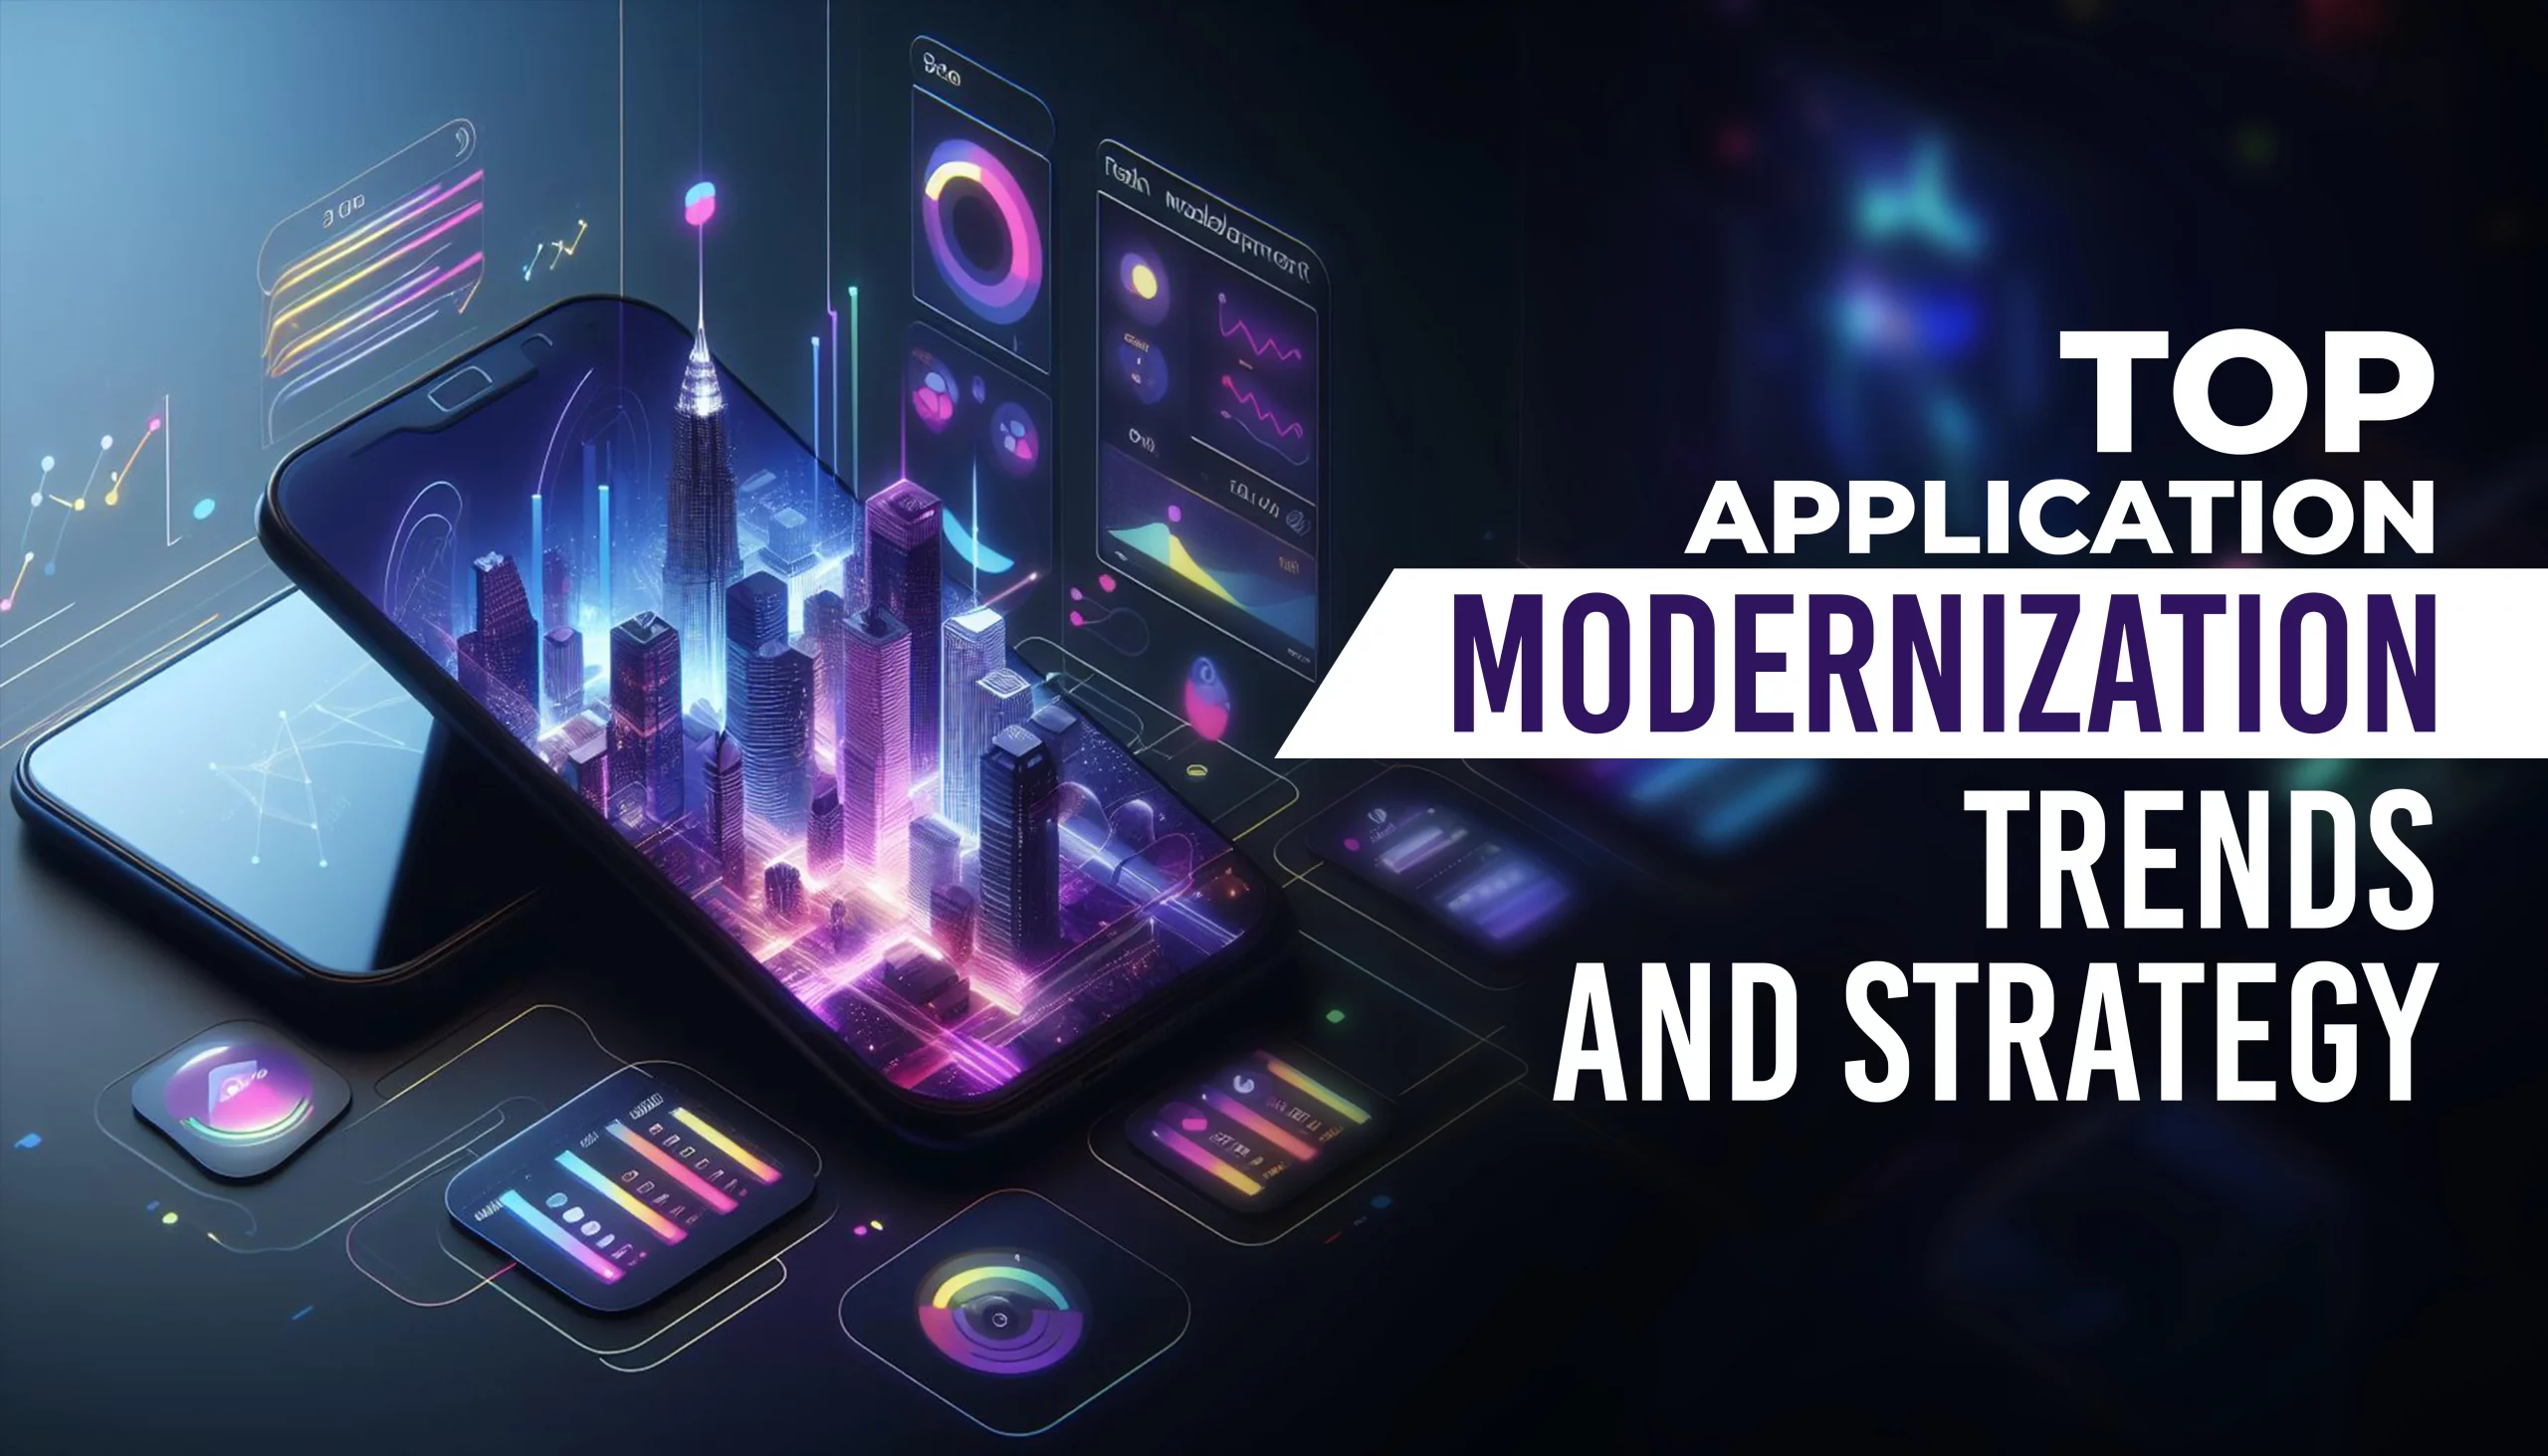 Top Application Modernization Trends And Strategy